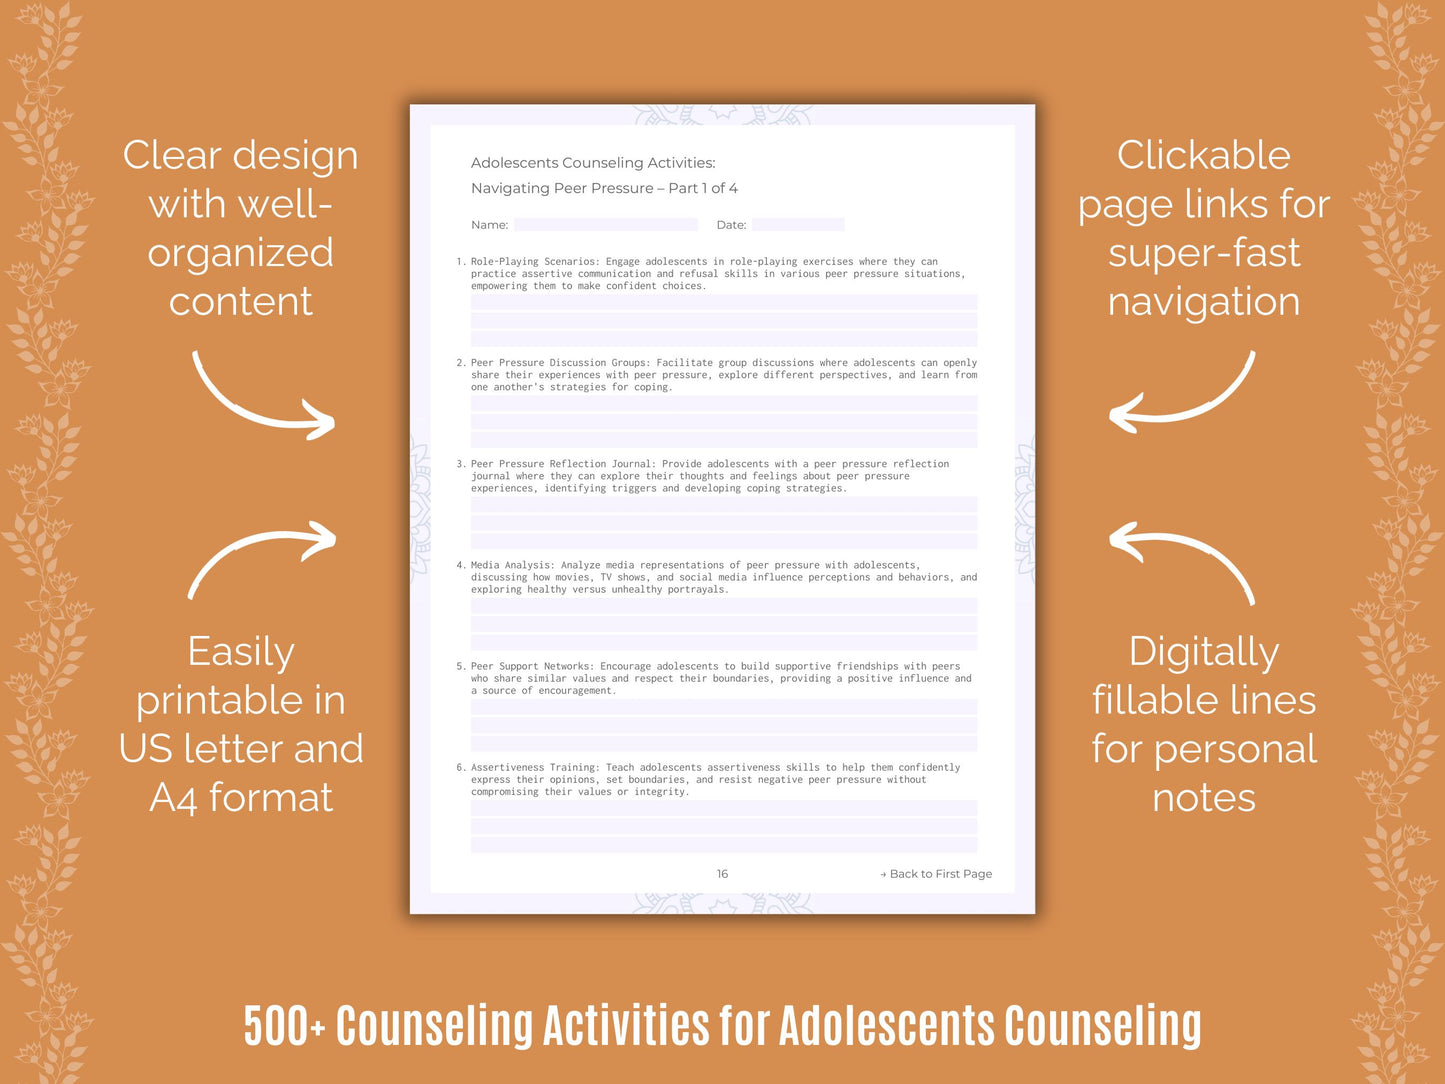 Adolescents Counseling Activities Workbook